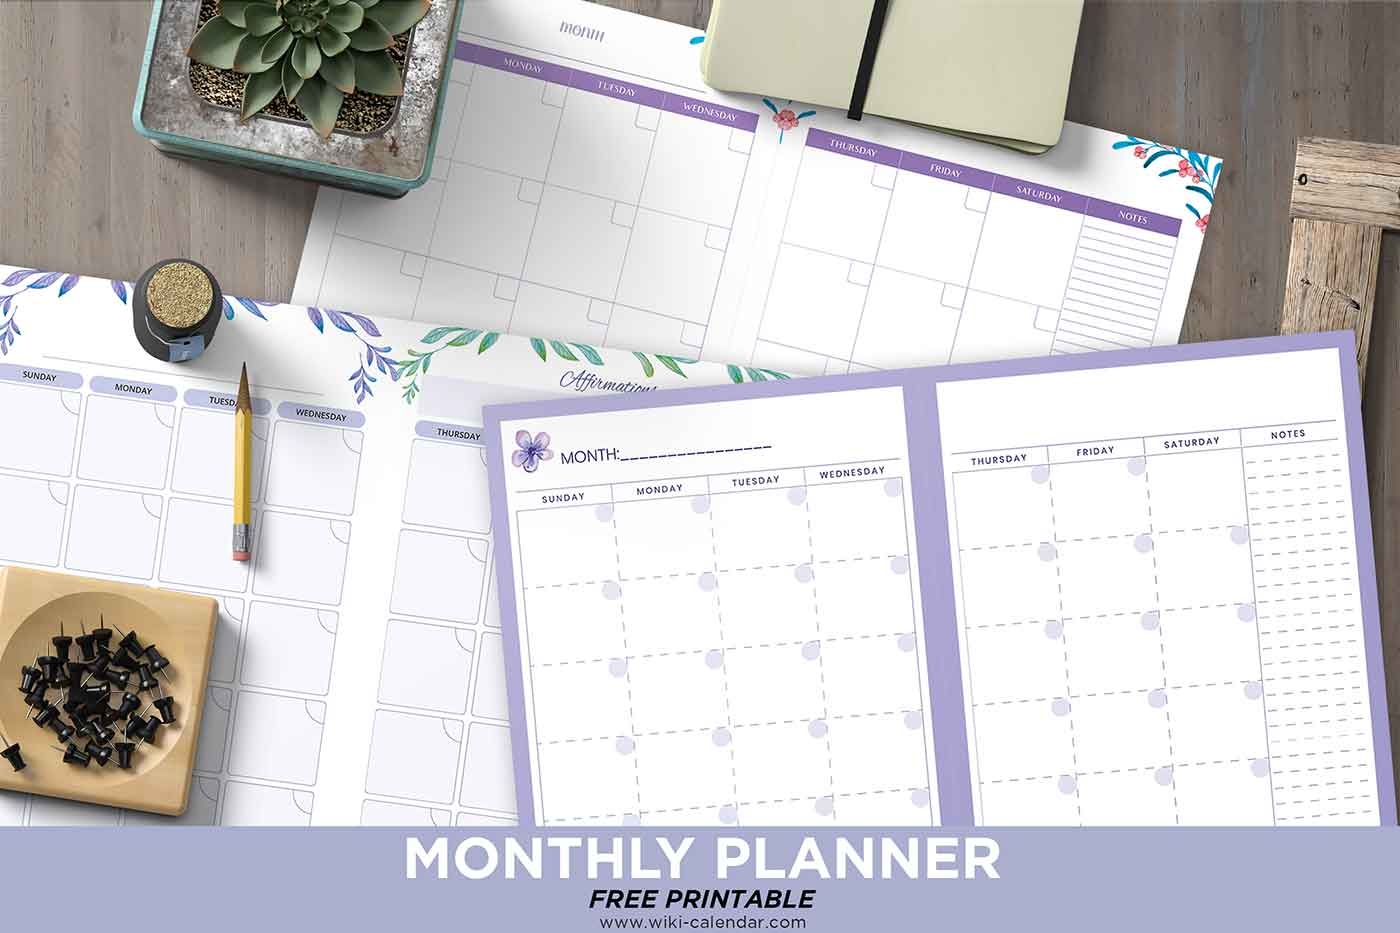 Free Printable Monthly Planner For 2024 Templates - Wiki Calendar throughout Free Printable Calendar 2024 Wiki Calendar